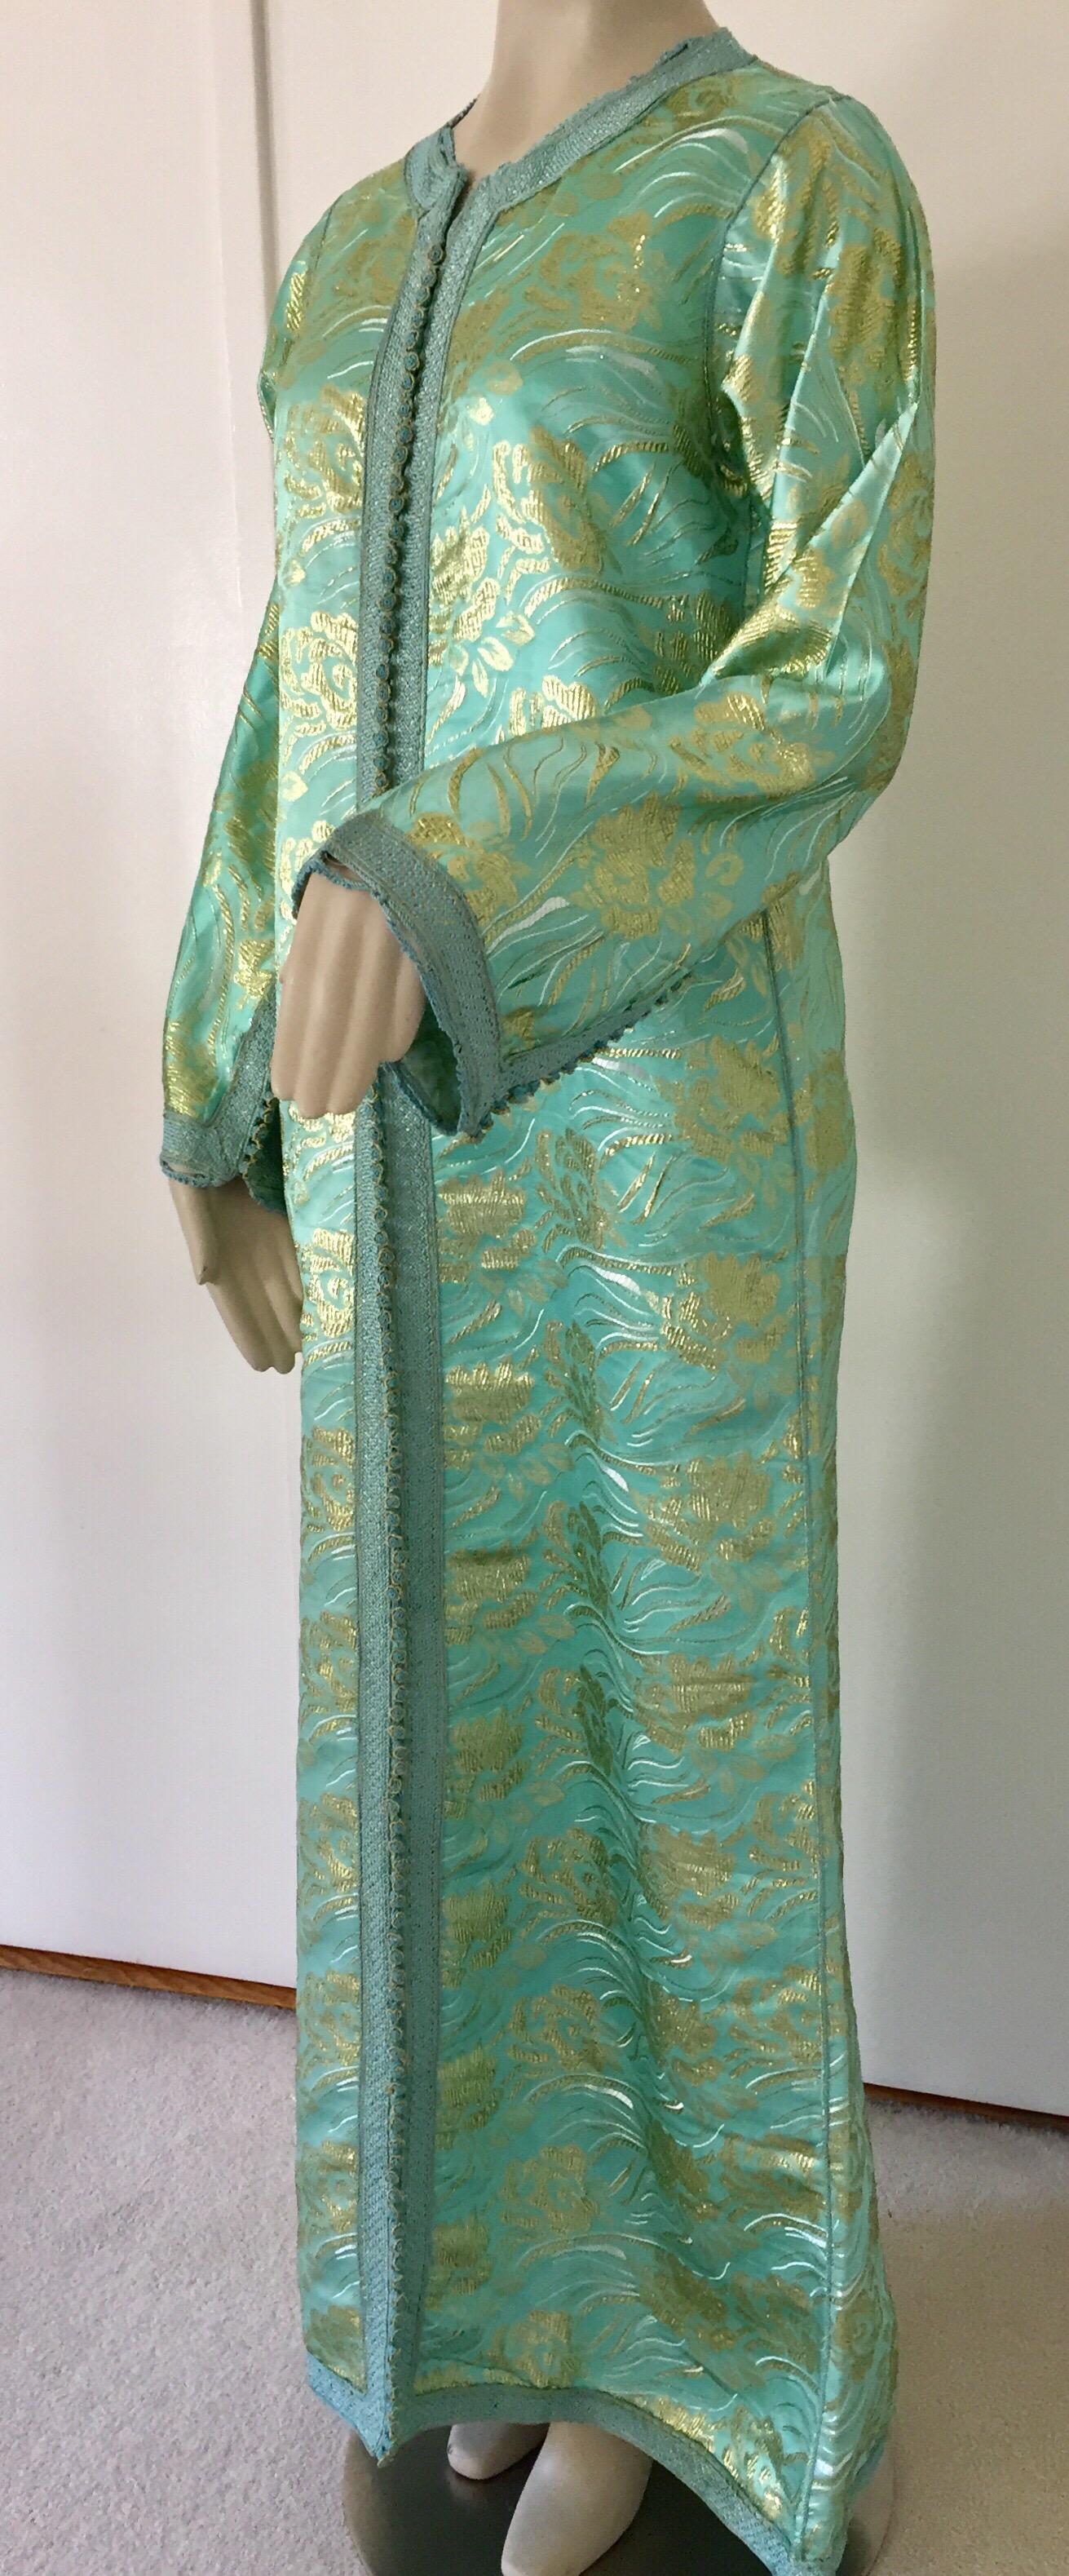 Hand-Crafted Moroccan Vintage Kaftan in Turquoise and Gold Floral Brocade Metallic Lame - 1 For Sale